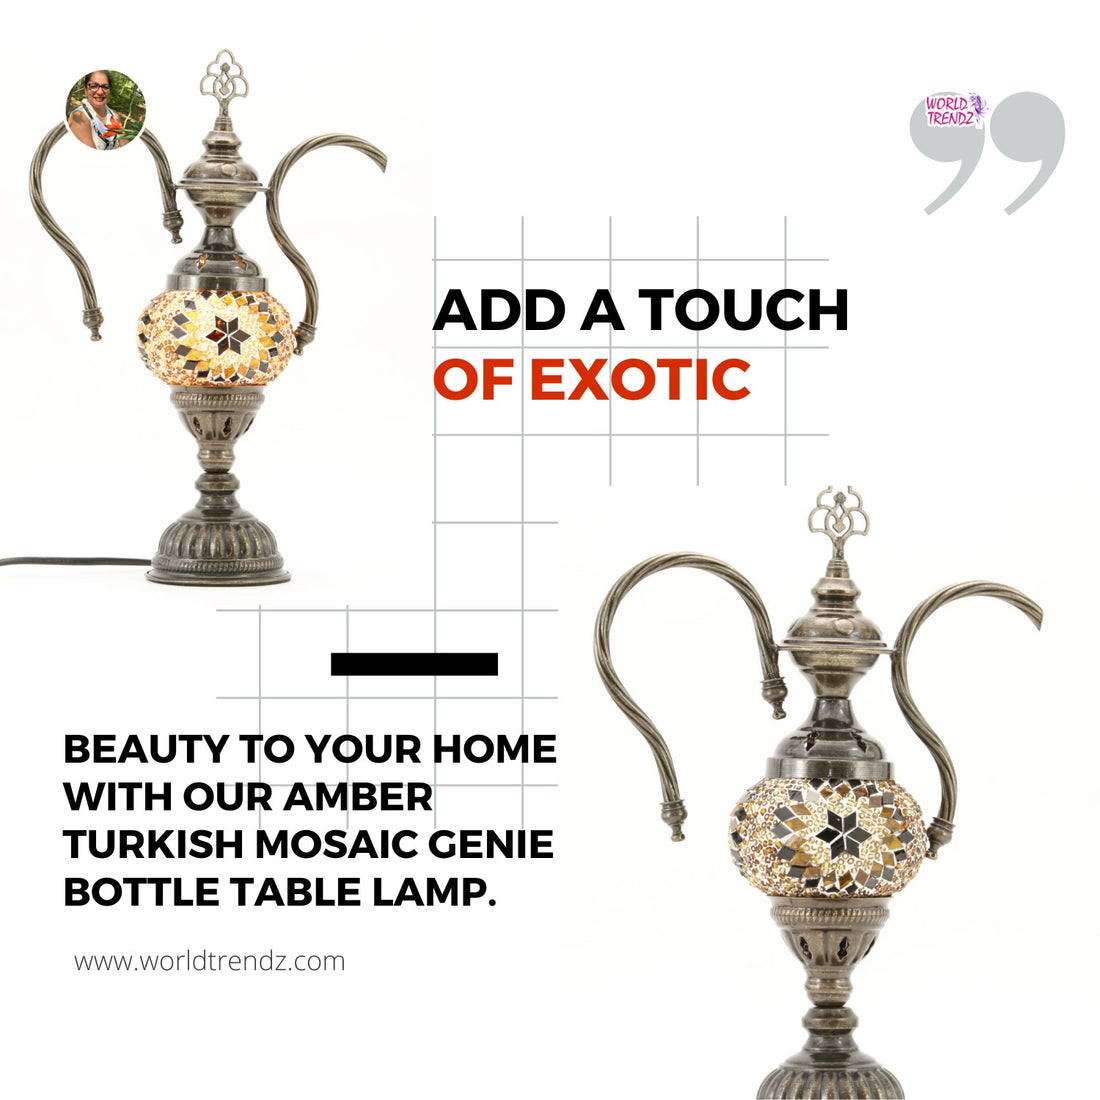 Shine a Light on Your Home Décor with the Exquisite Amber Turkish Mosaic Genie Bottle Table Lamp